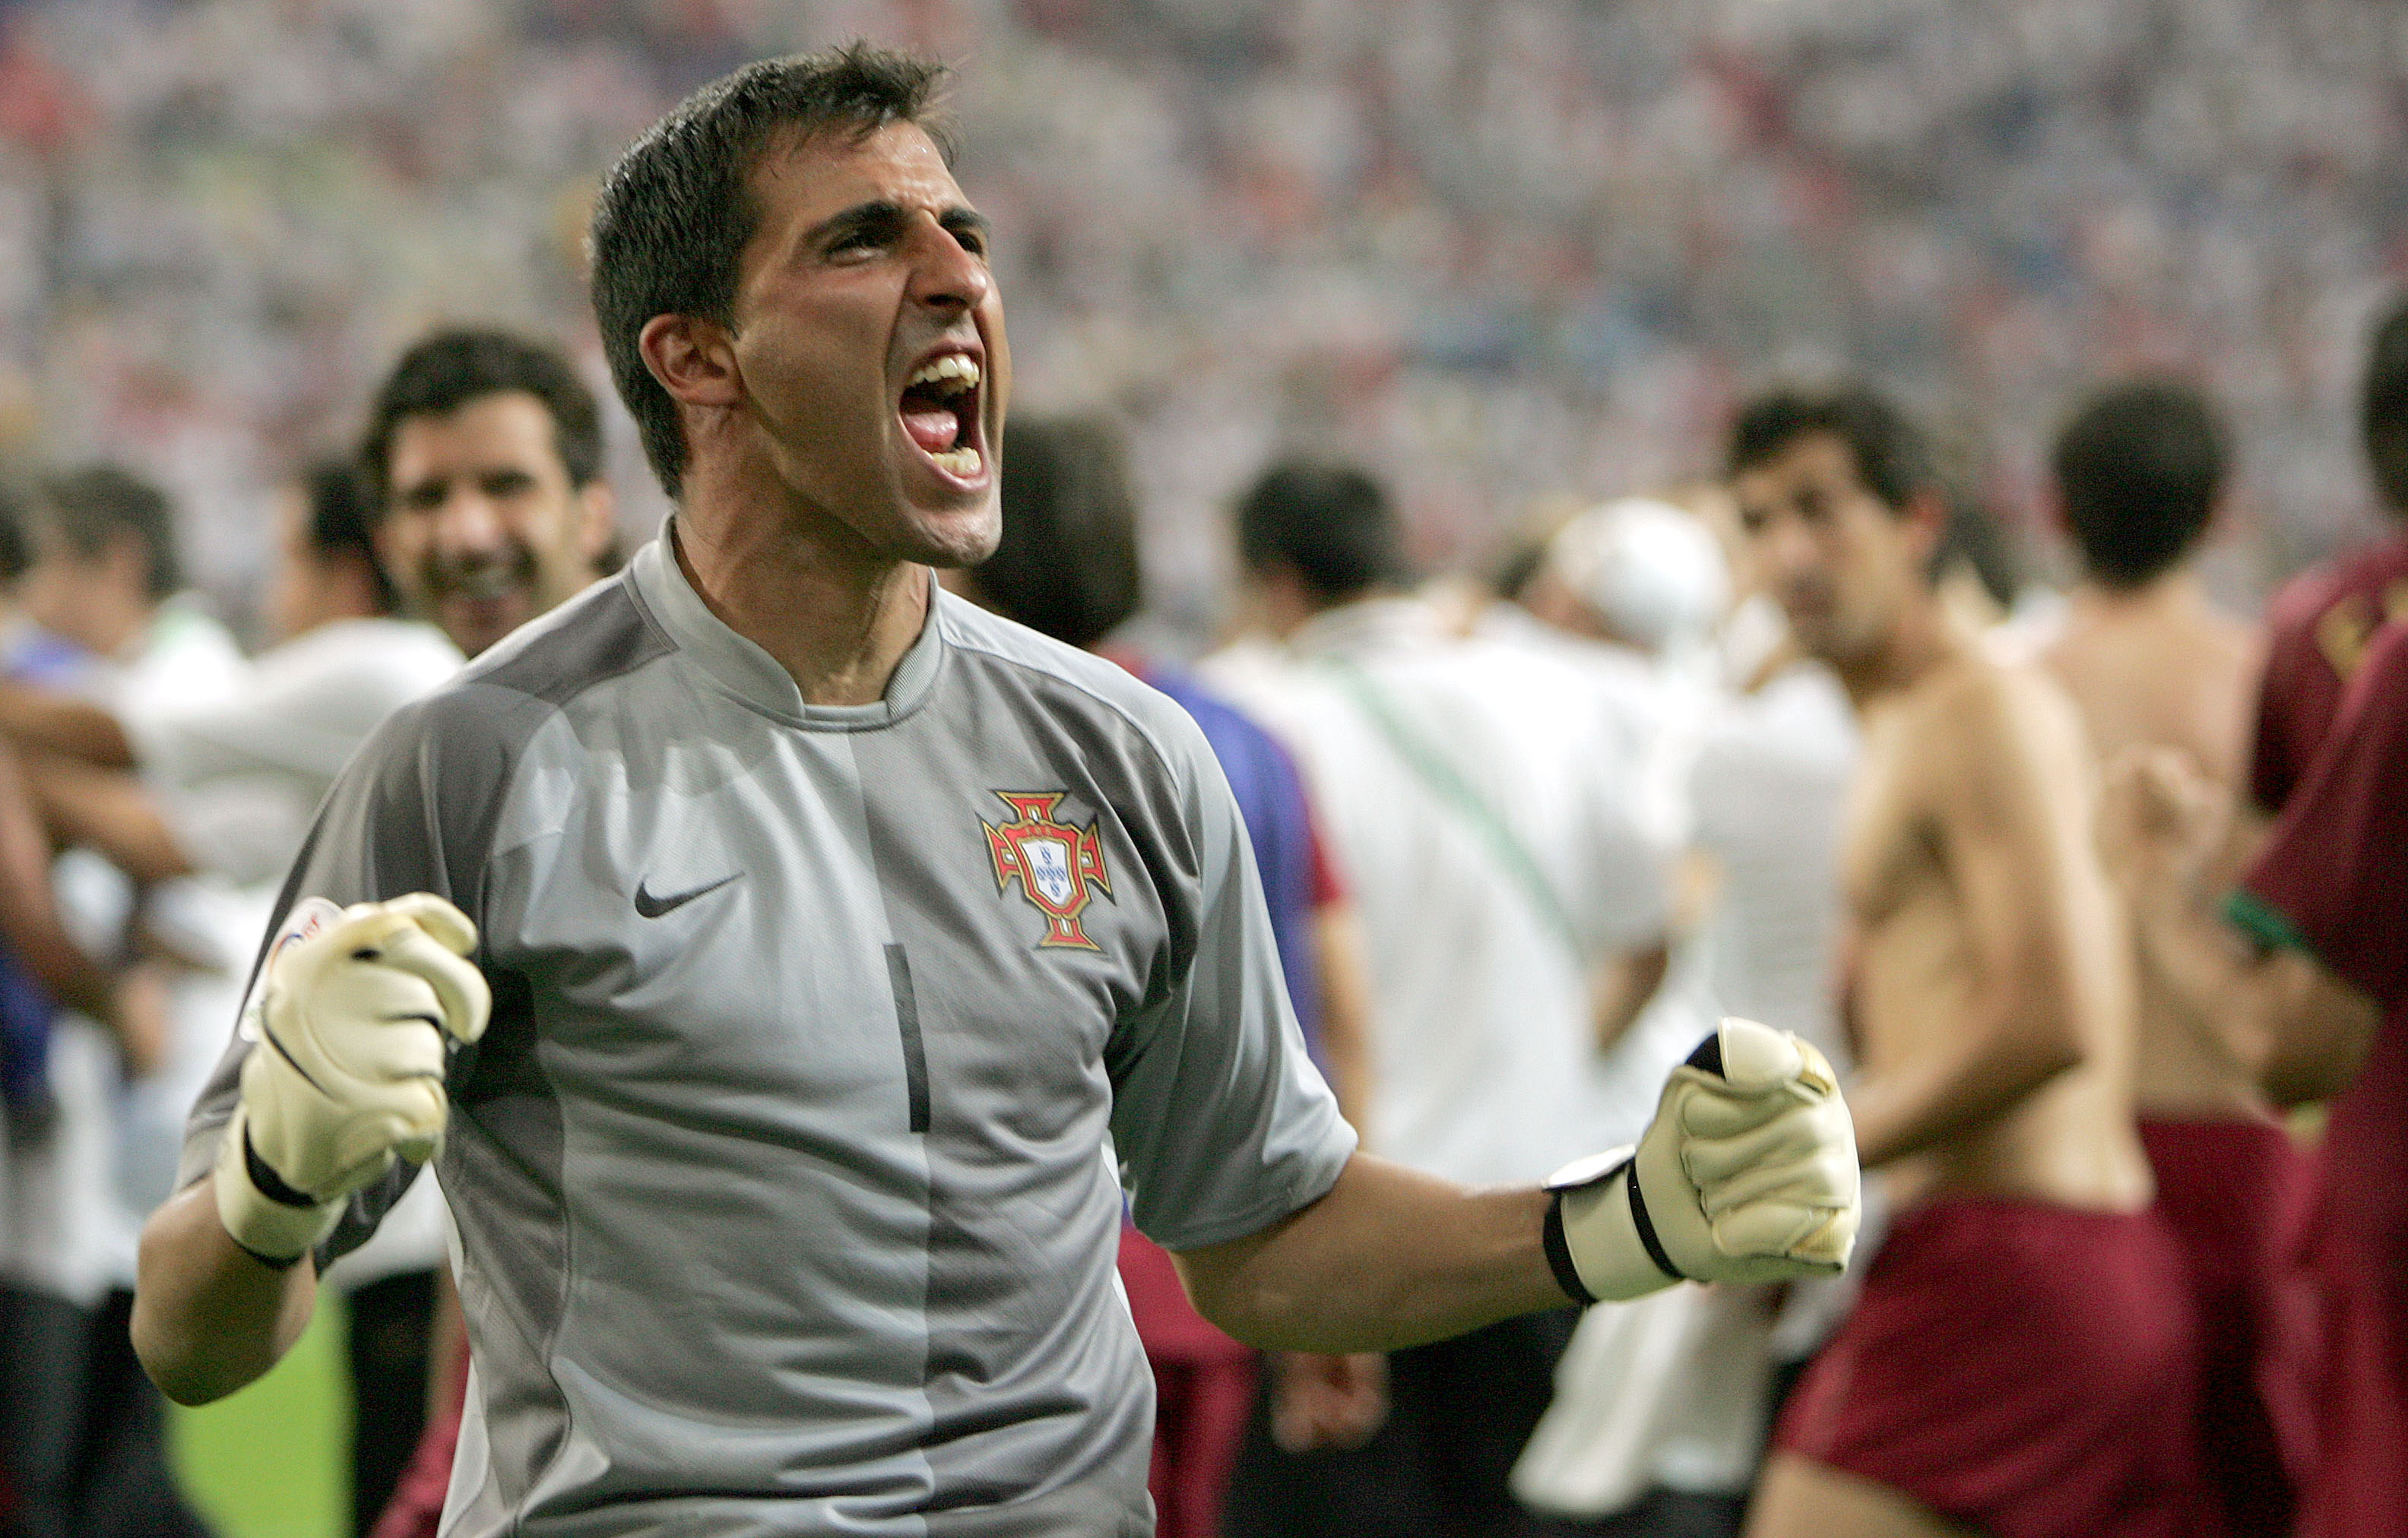 Ricardo celebrates after Portugal's penalty shootout win over England at the 2006 World Cup.